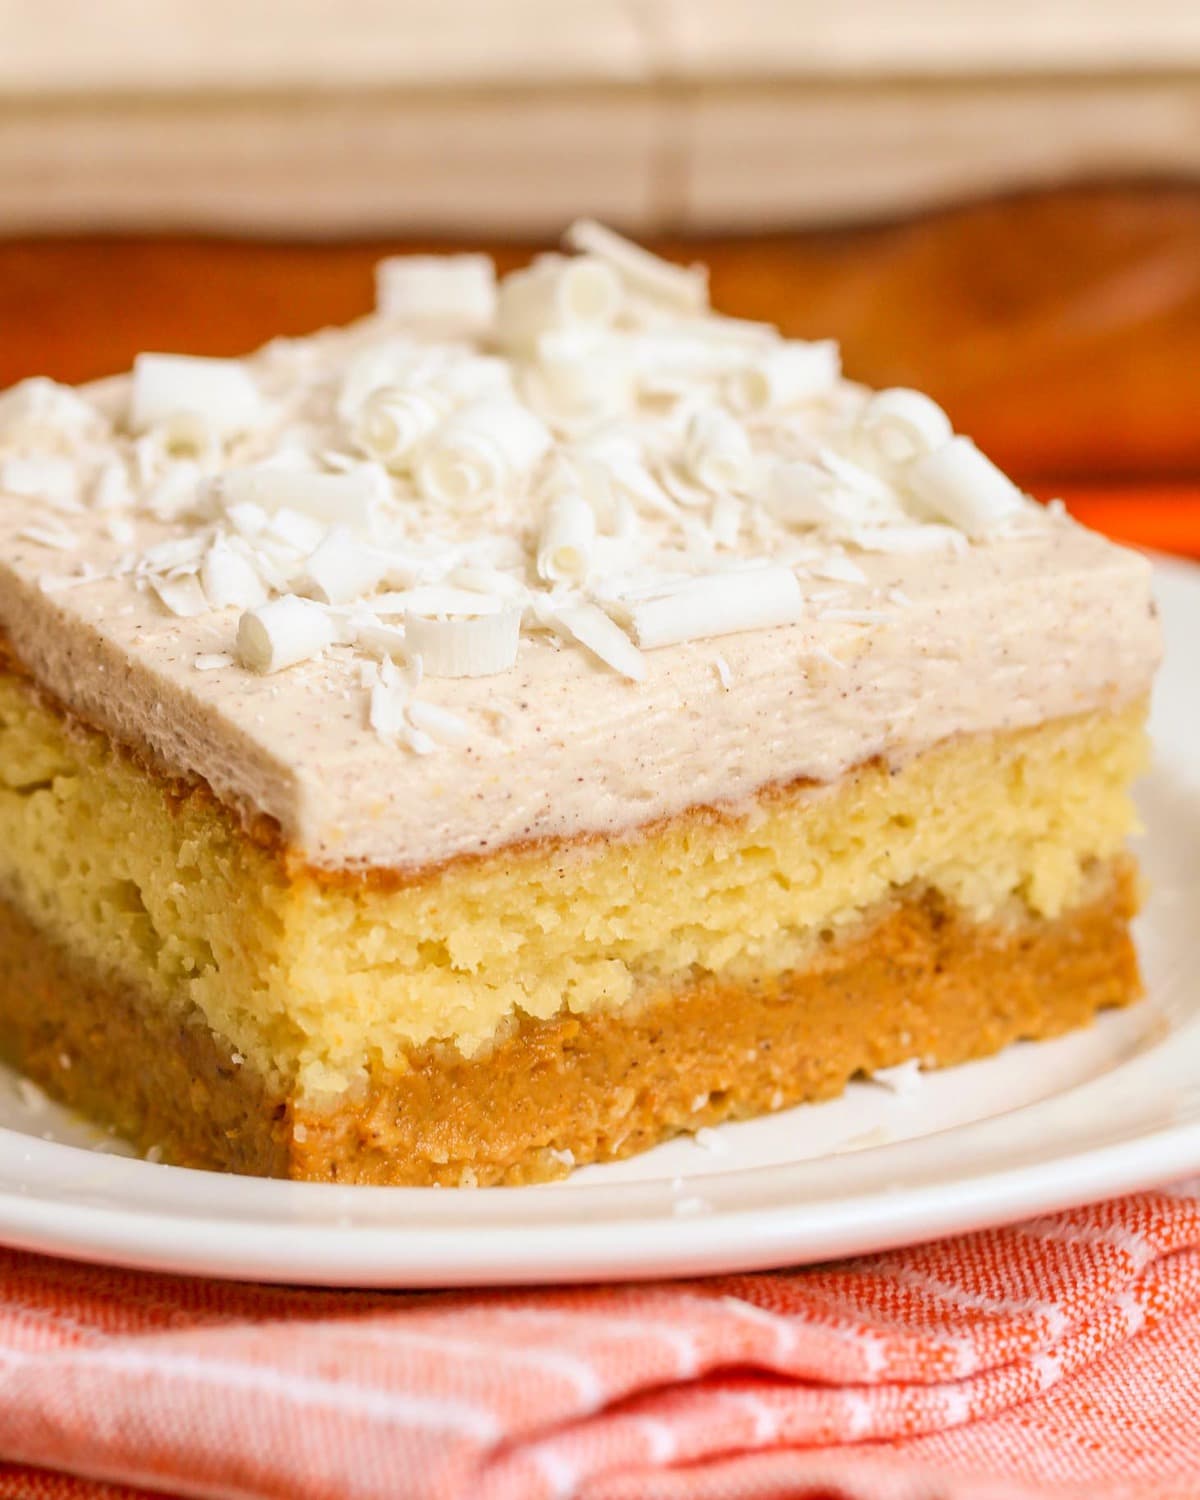 Pumpkin Magic Cake topped with white chocolate curls on a white plate.